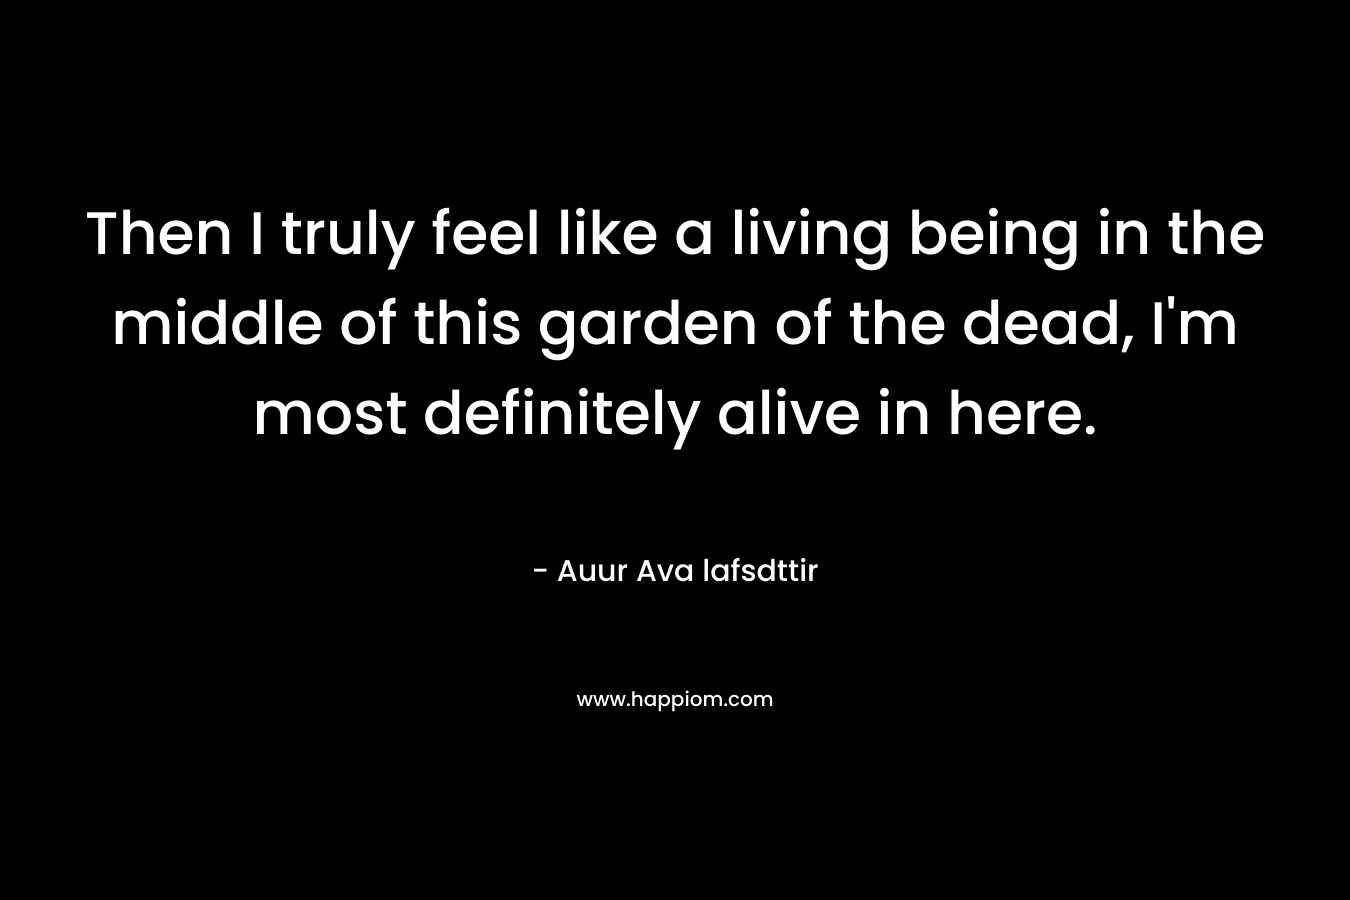 Then I truly feel like a living being in the middle of this garden of the dead, I'm most definitely alive in here.